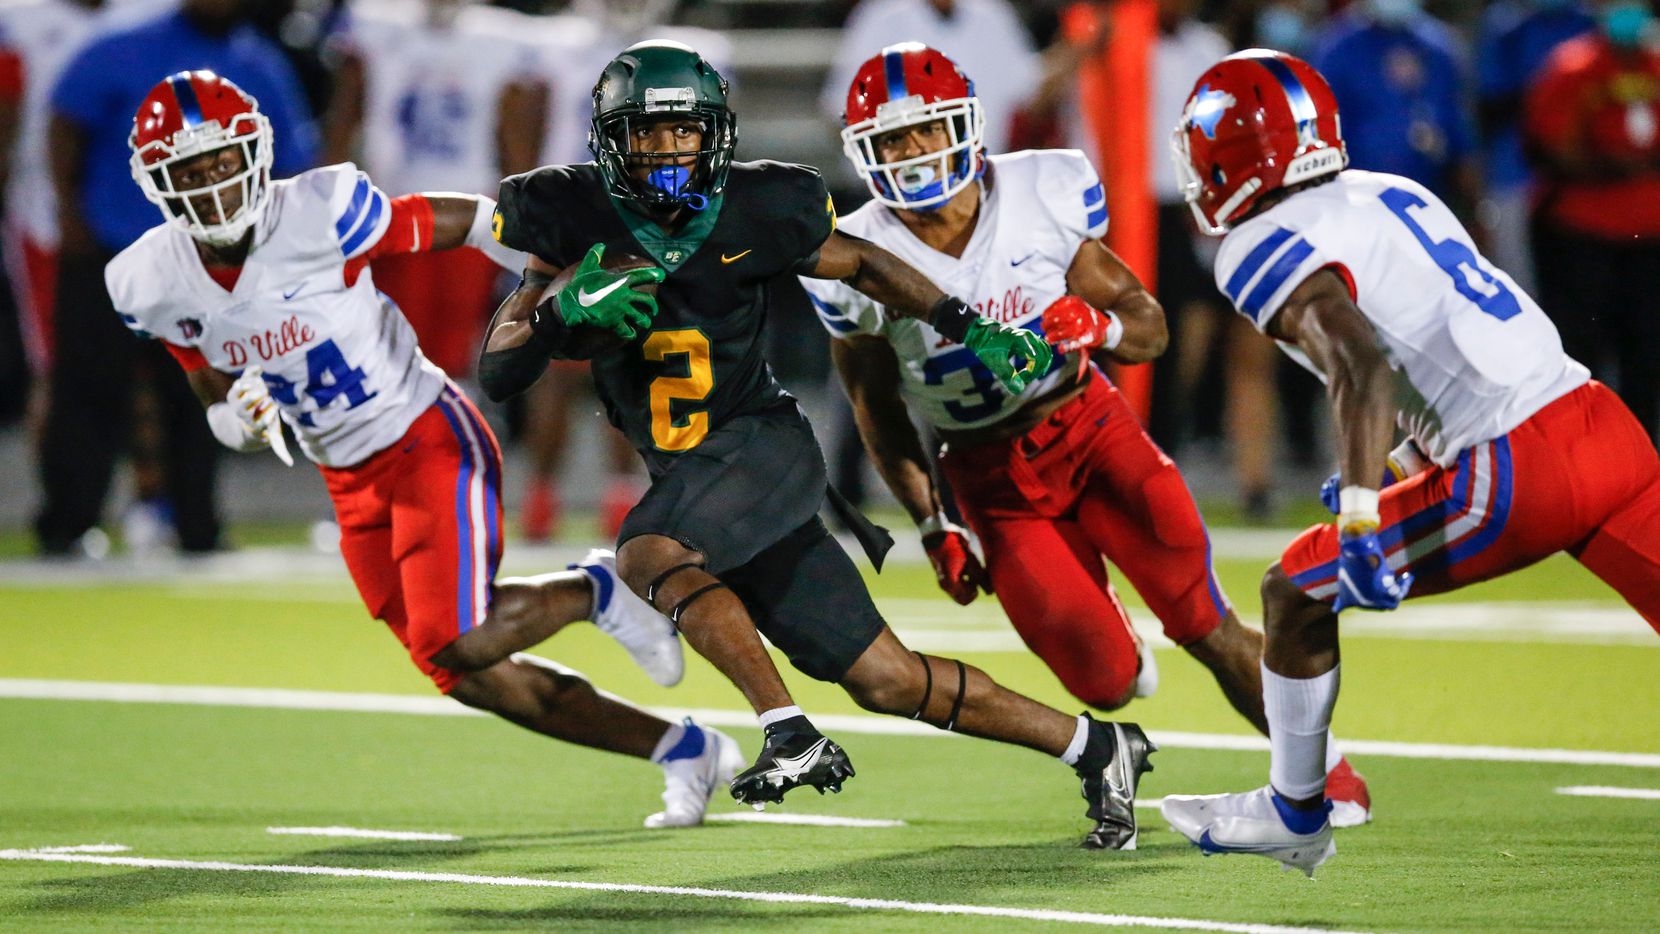 DeSoto senior wide receiver Mike Murphy (2) carries the ball against the Duncanville defense...